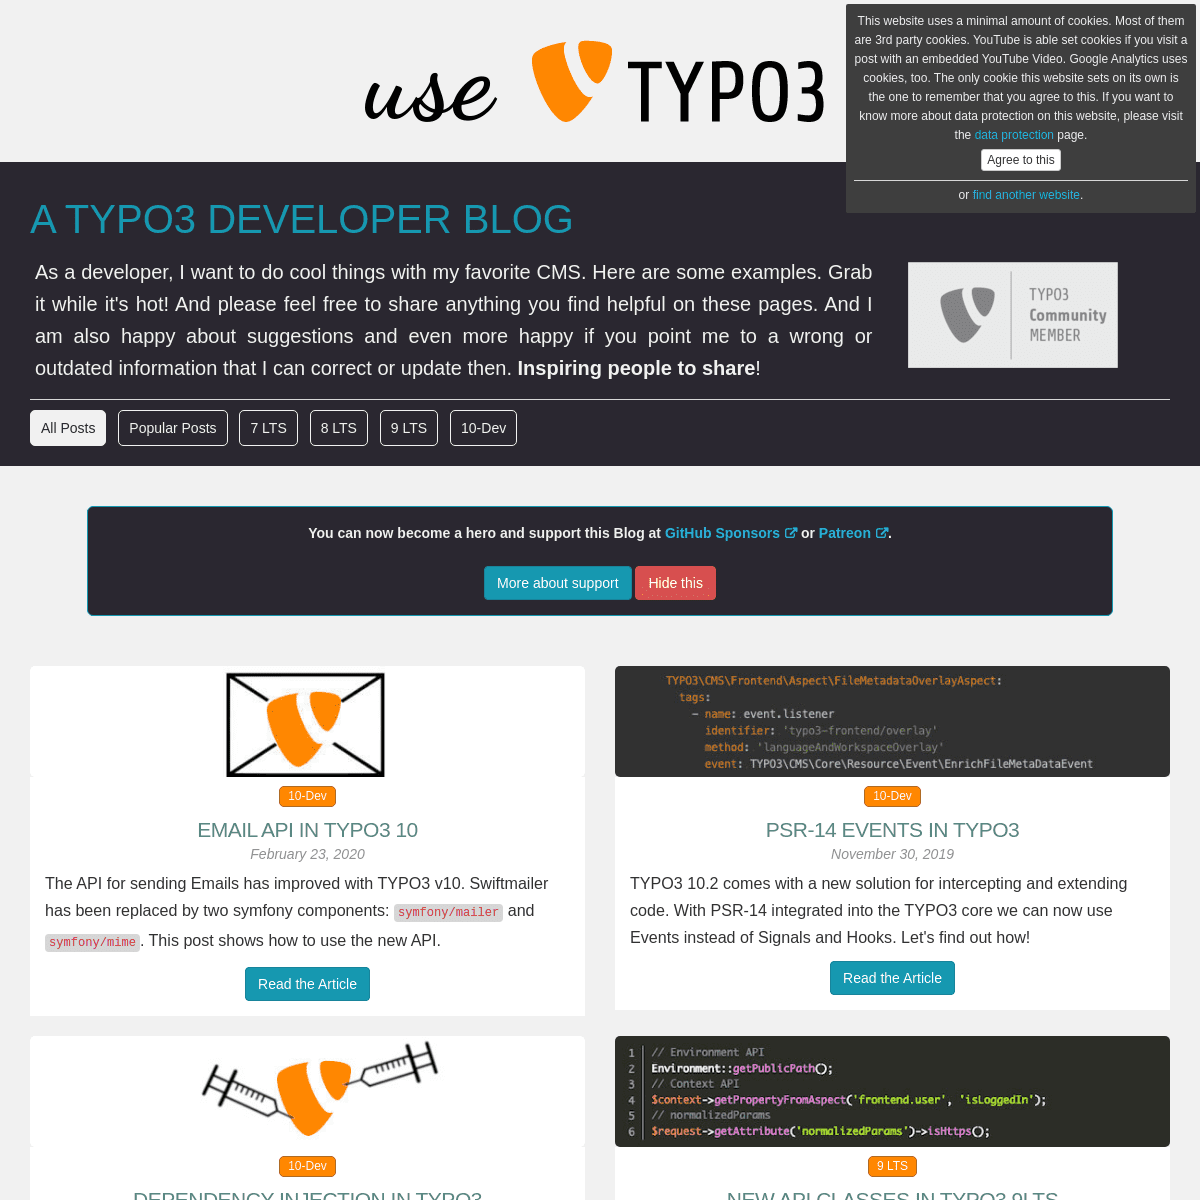 A complete backup of usetypo3.com